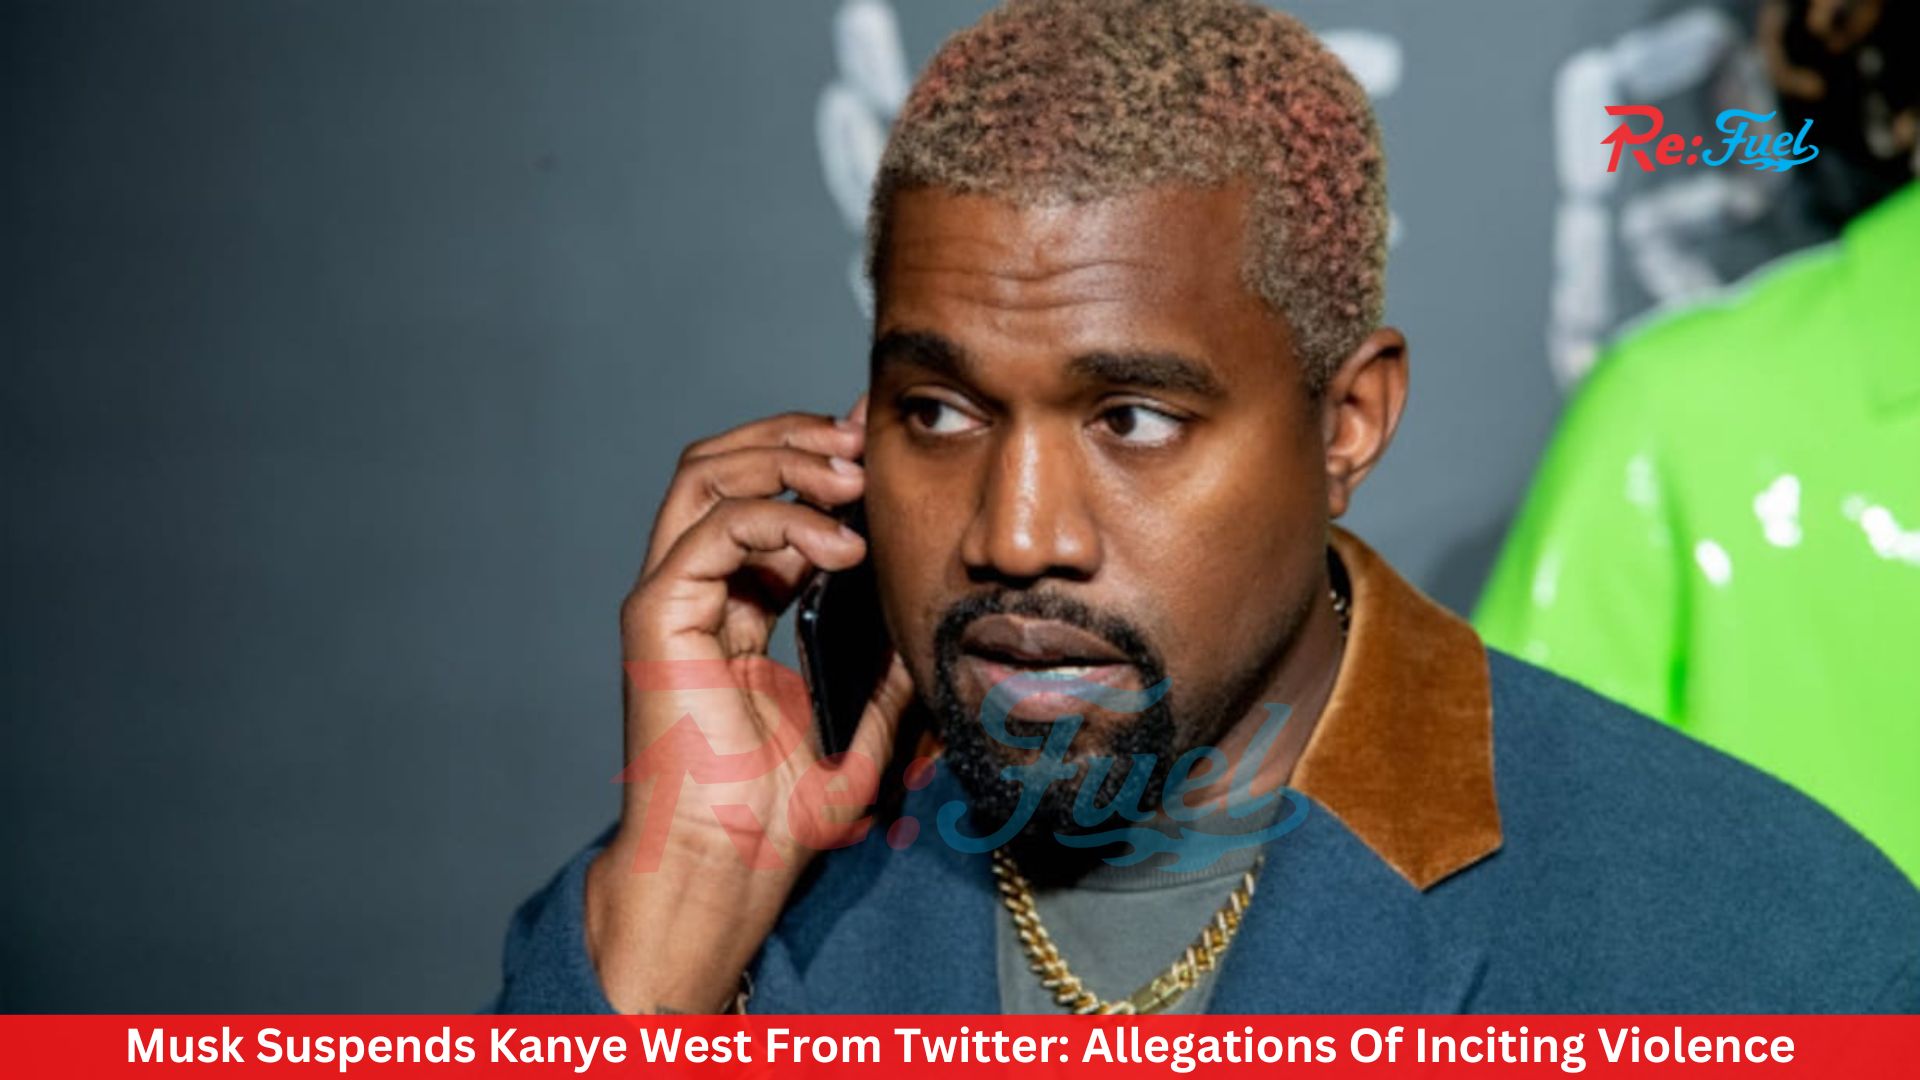 Musk Suspends Kanye West From Twitter: Allegations Of Inciting Violence